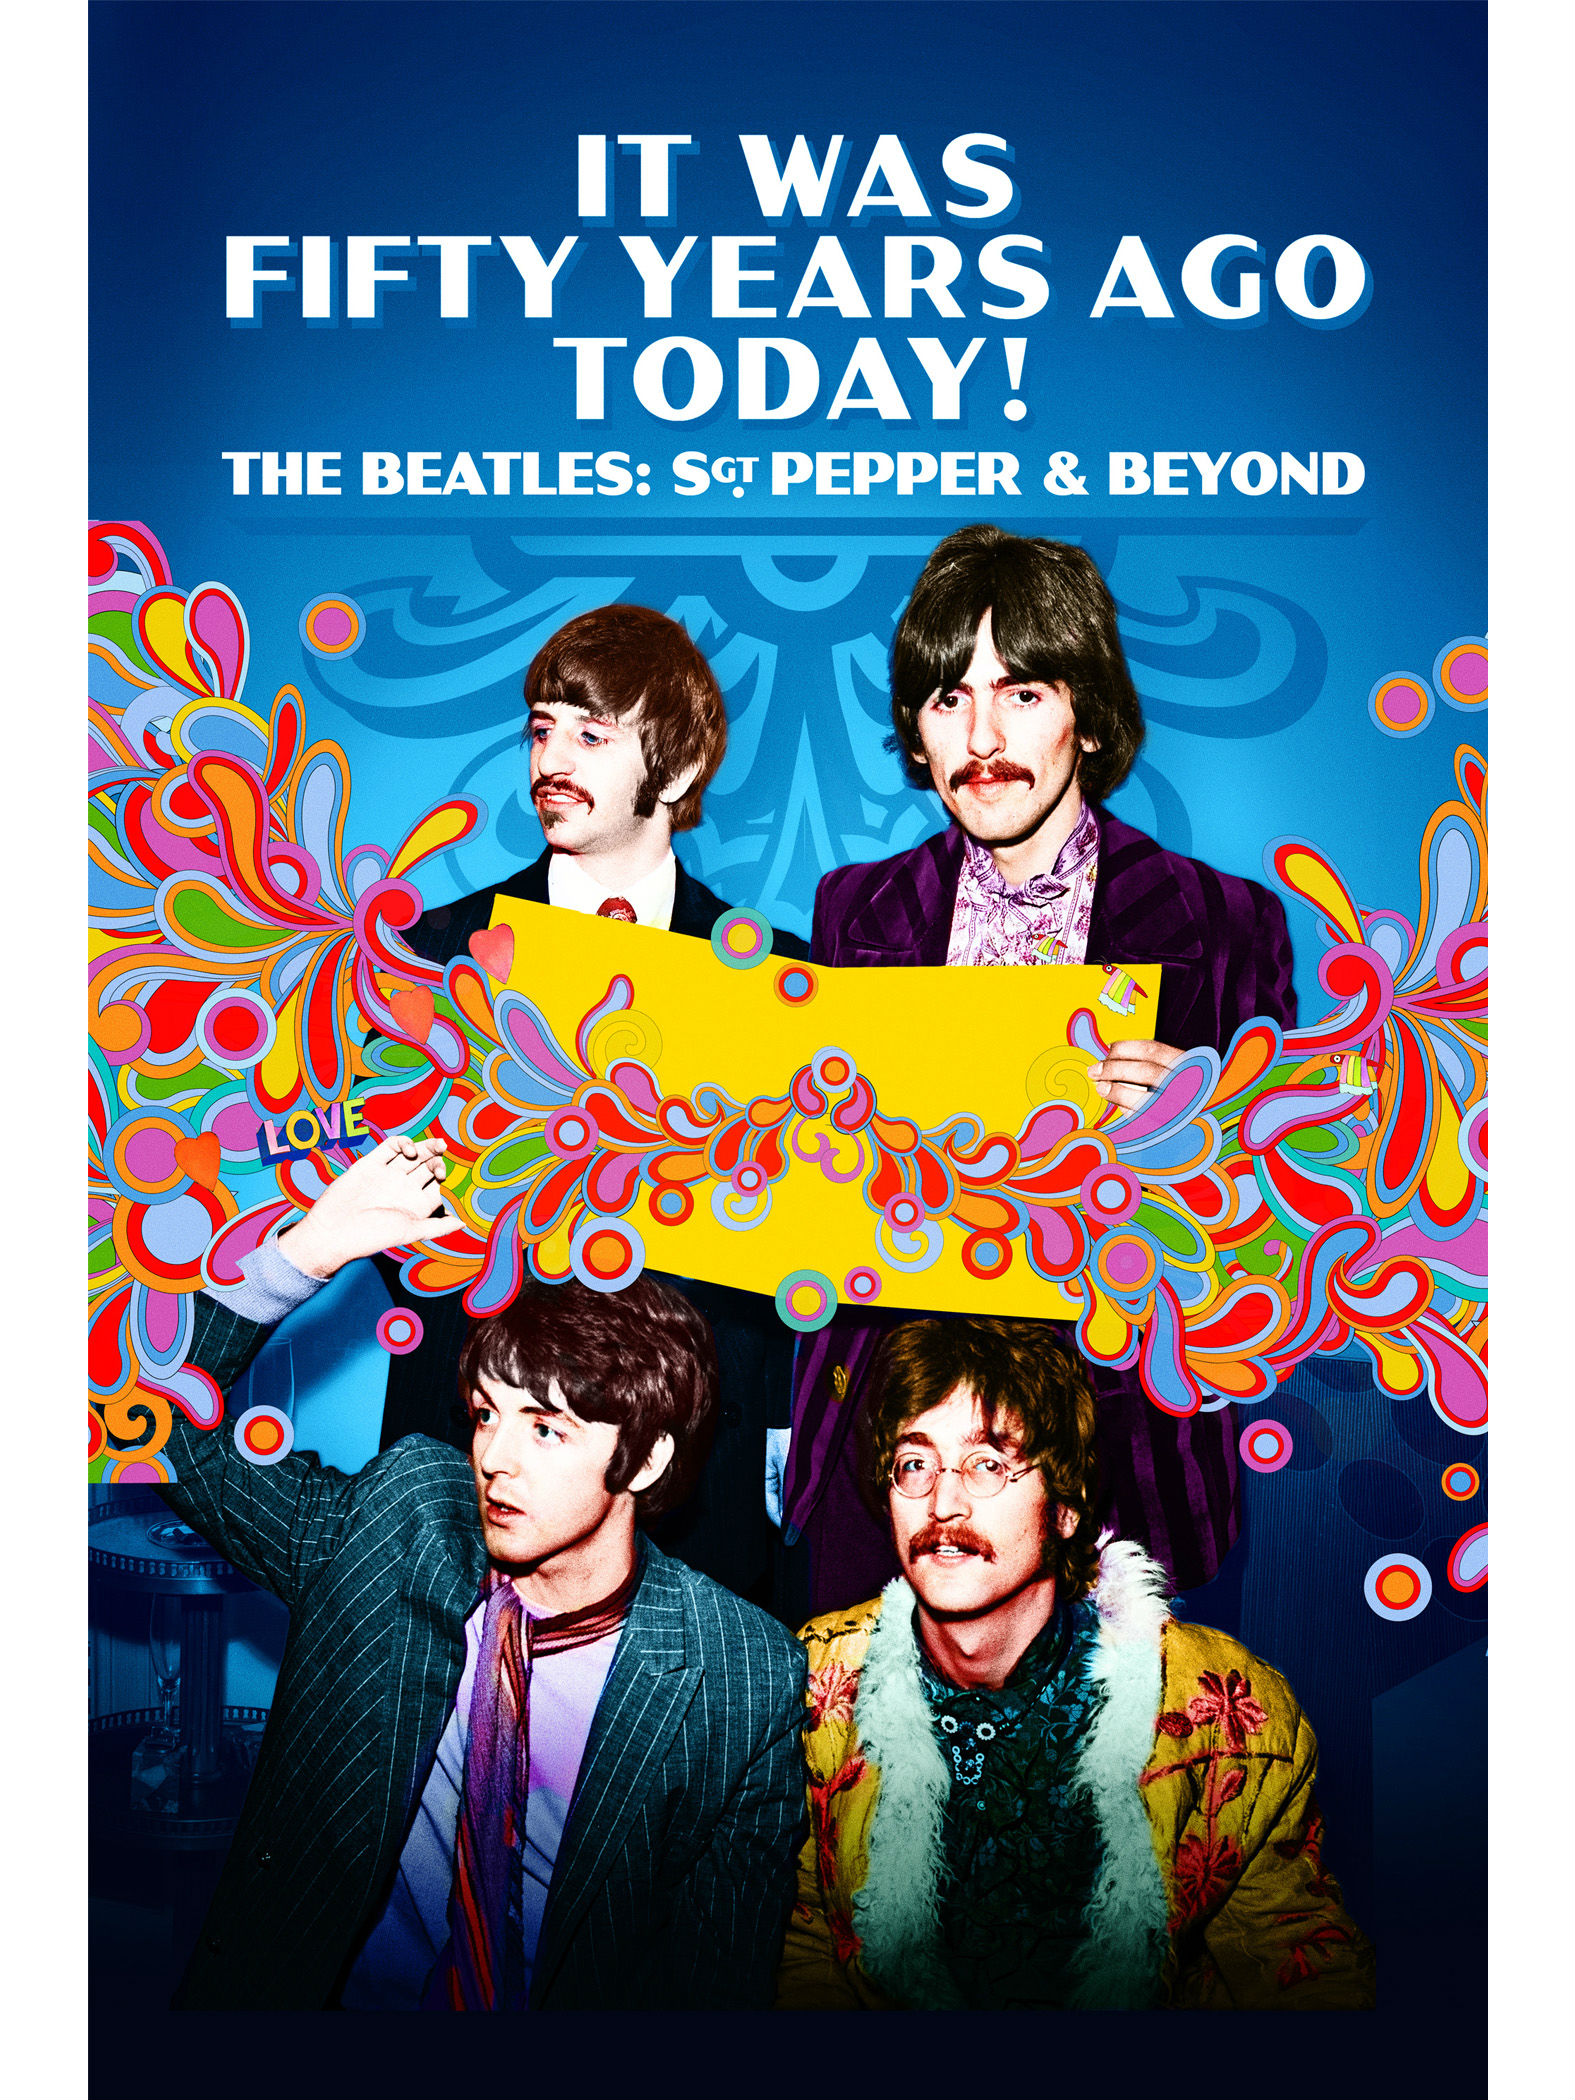 The Beatles - 'It Was Fifty Years Ago Today!'